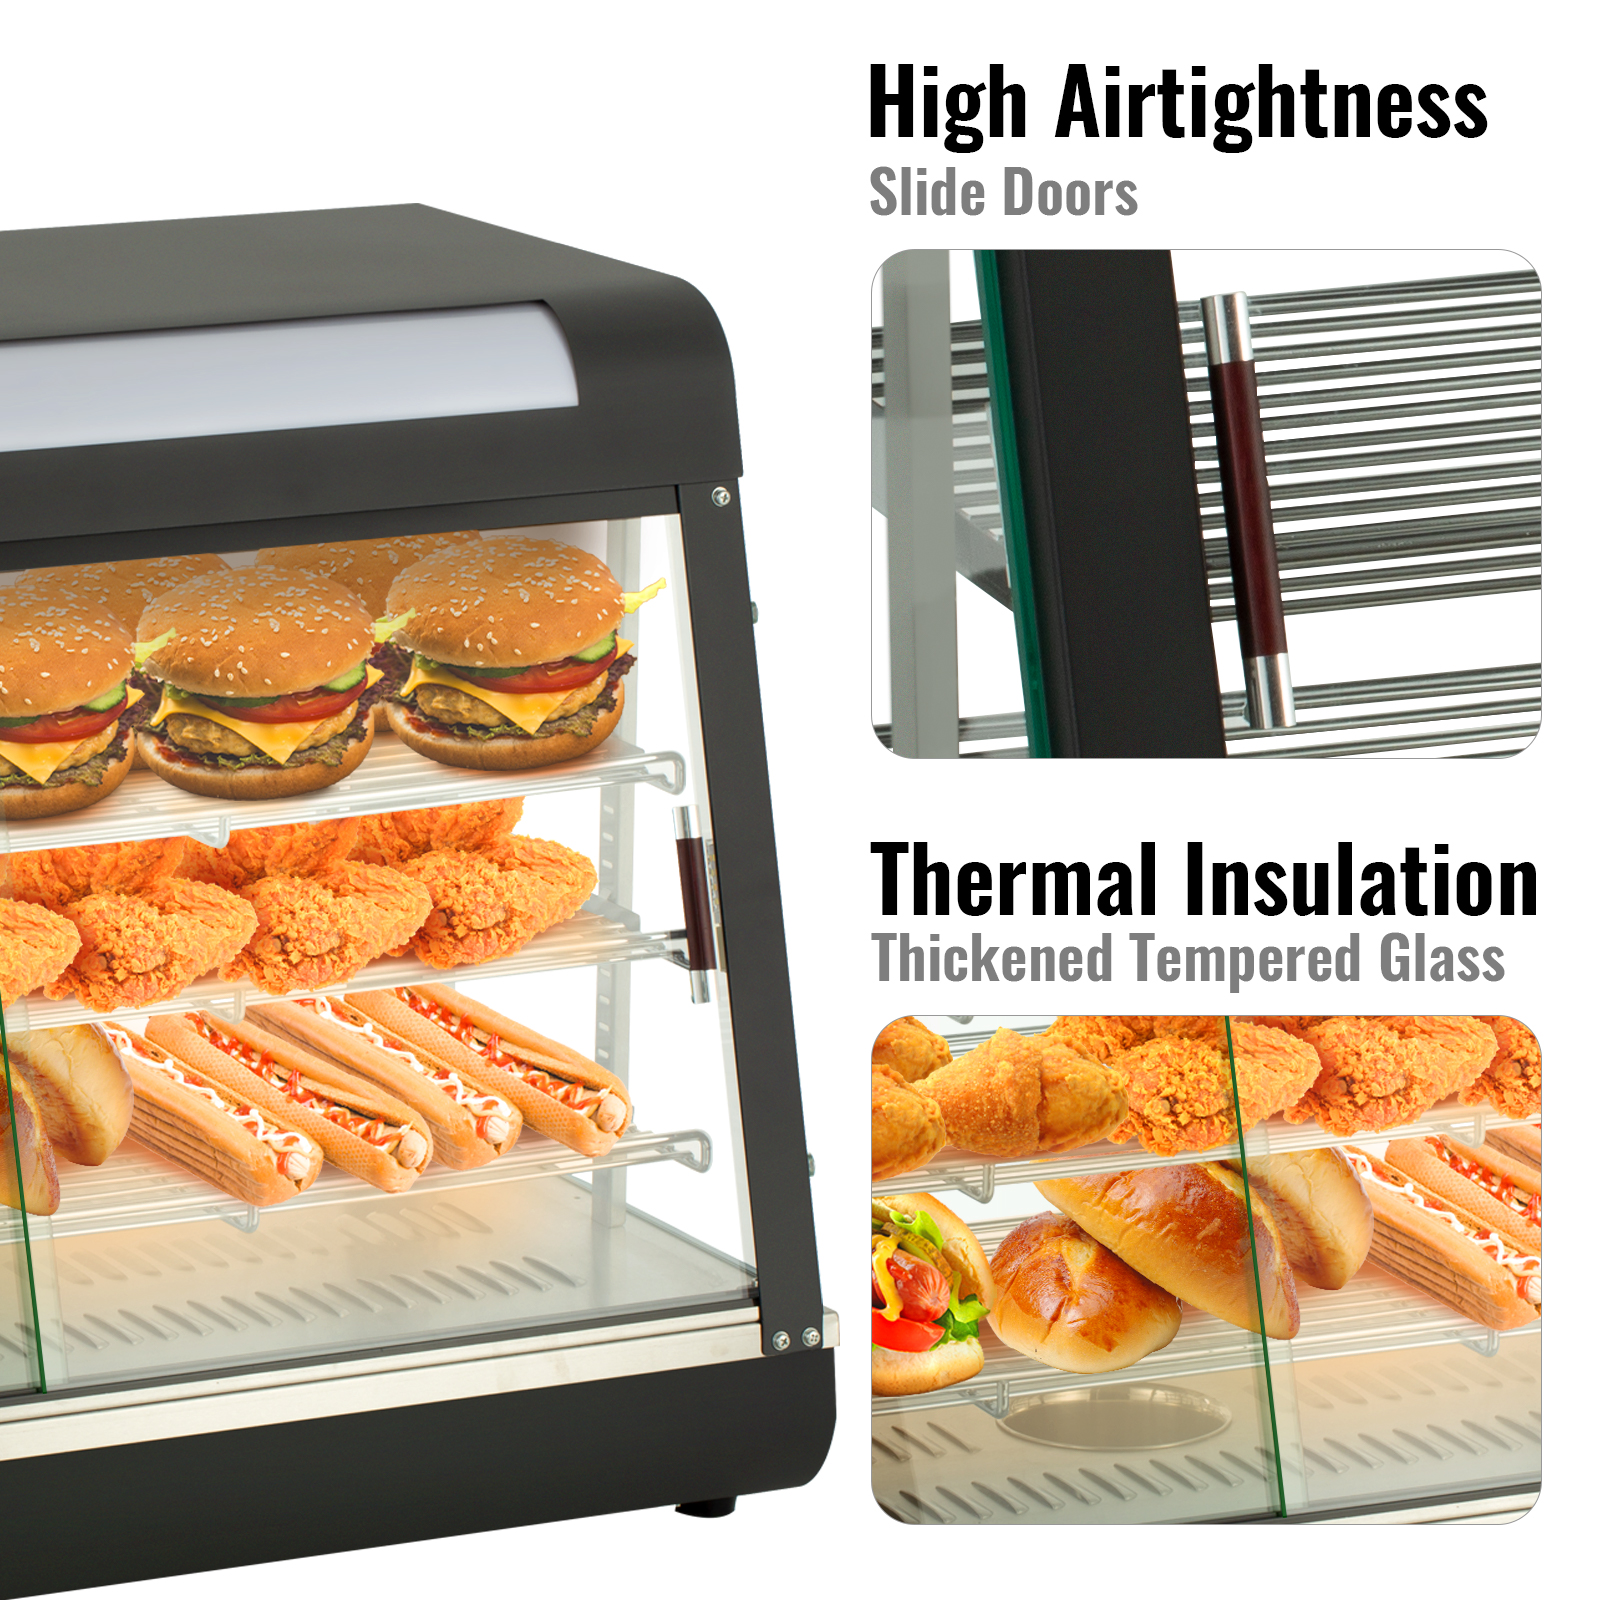 VEVOR 2-Tier Commercial Food Warmer Countertop Pizza Cabinet with Water  Tray